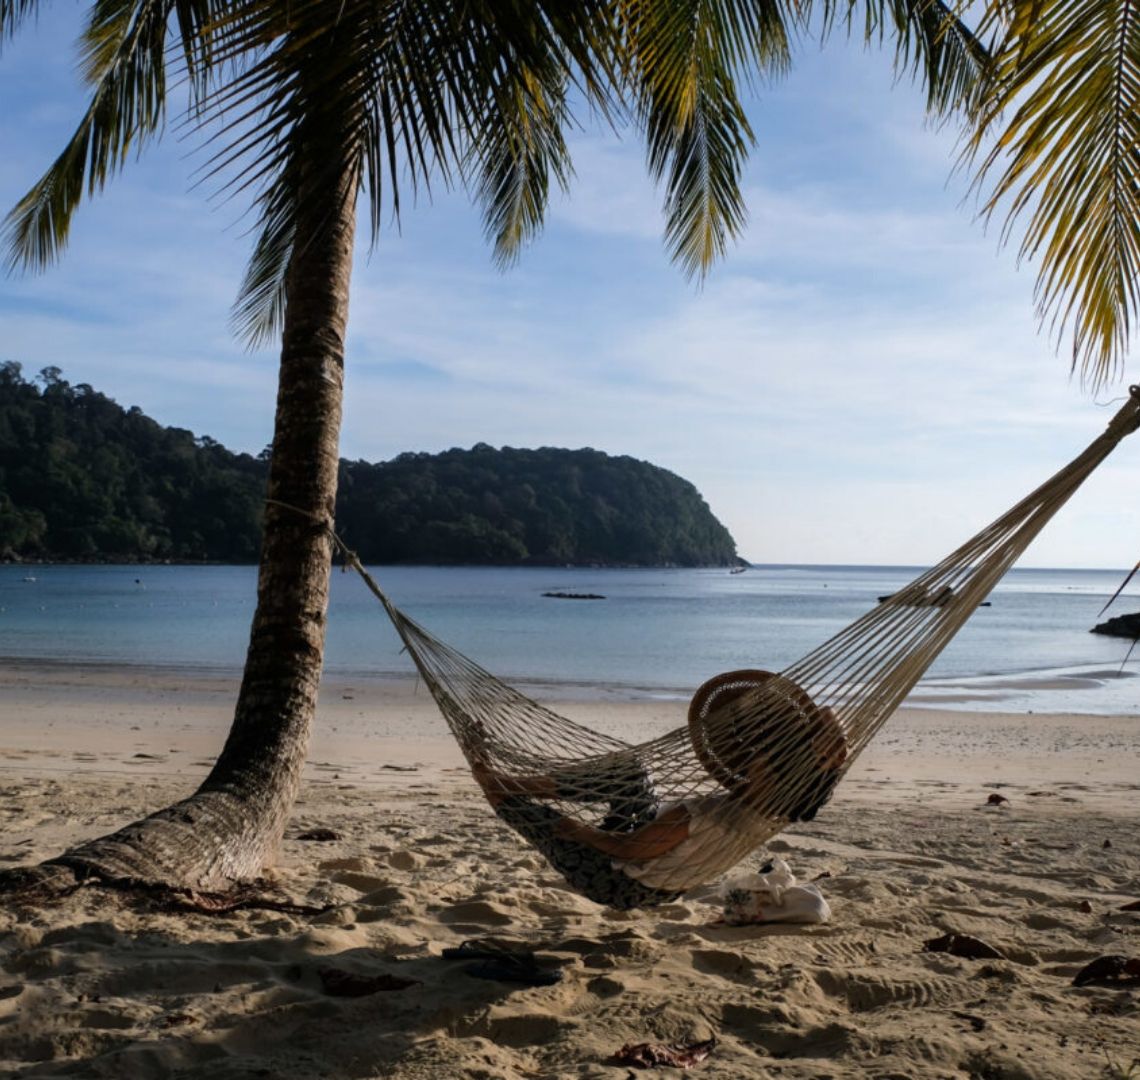 Best Secret Islands In Malaysia -  Pulau Tenggol - a lady in a hat sits in a hammock stung between 2 palm trees on a beach. The sea is completely calm and there is a dark green headland sticking out from the left.